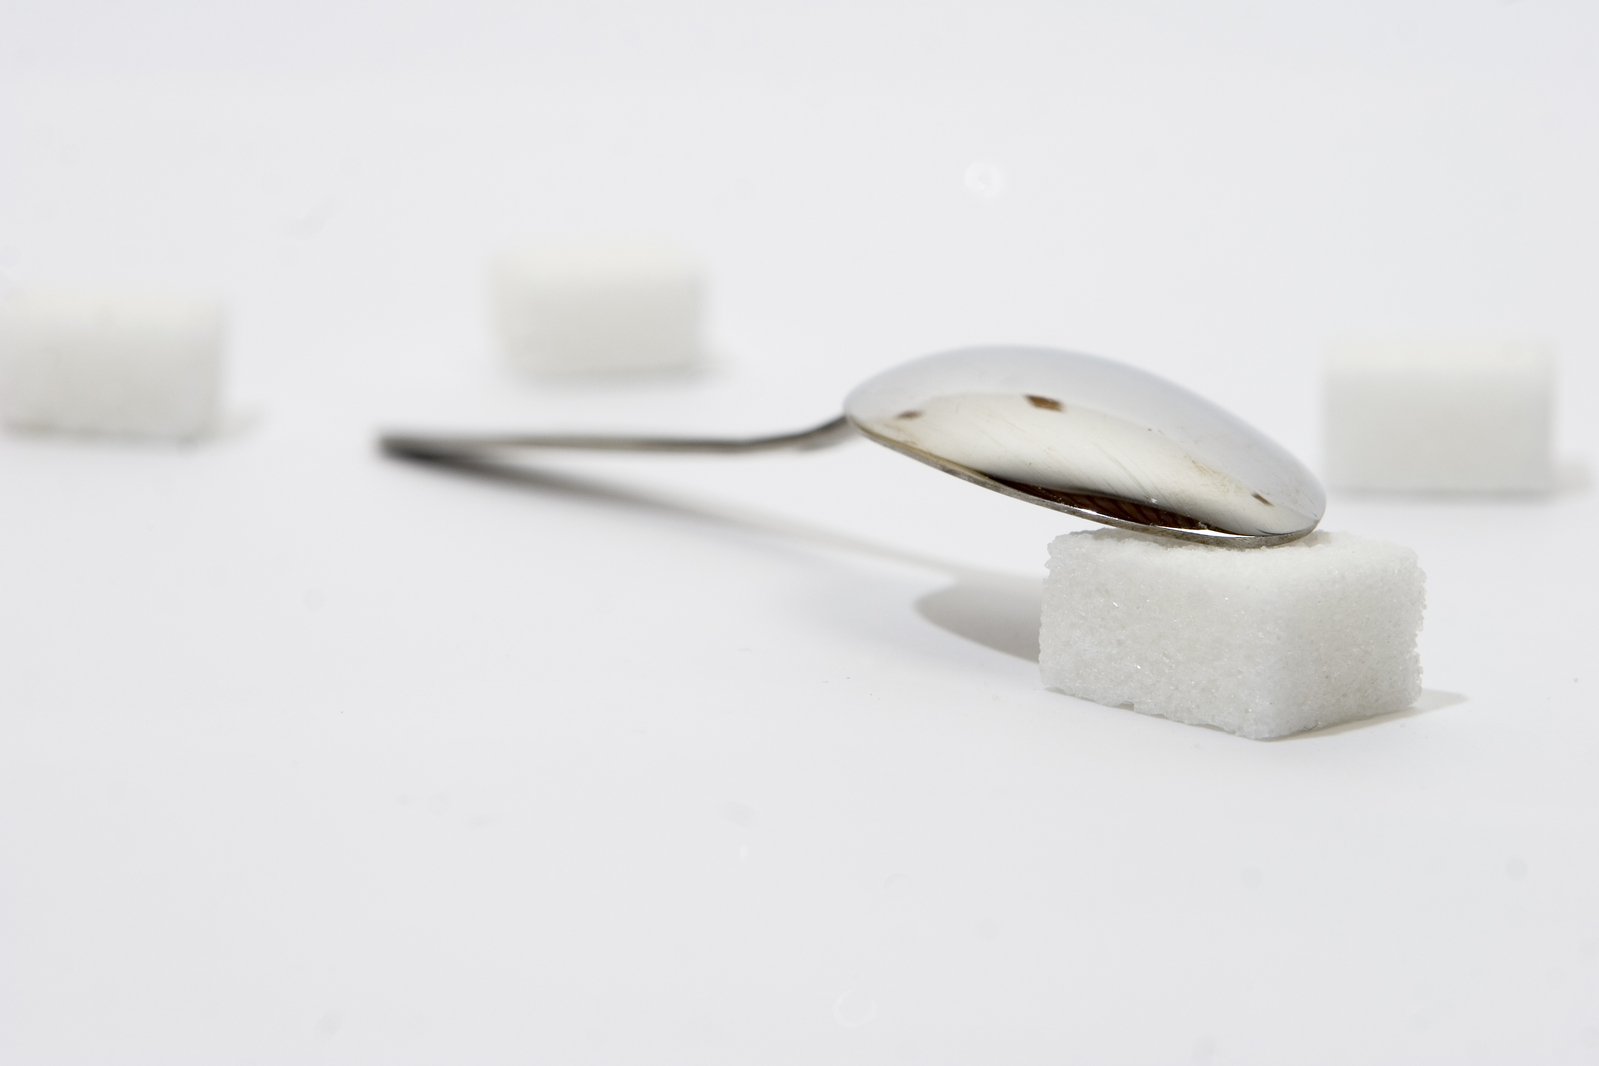 a spoon is over some sugar cubes on a table